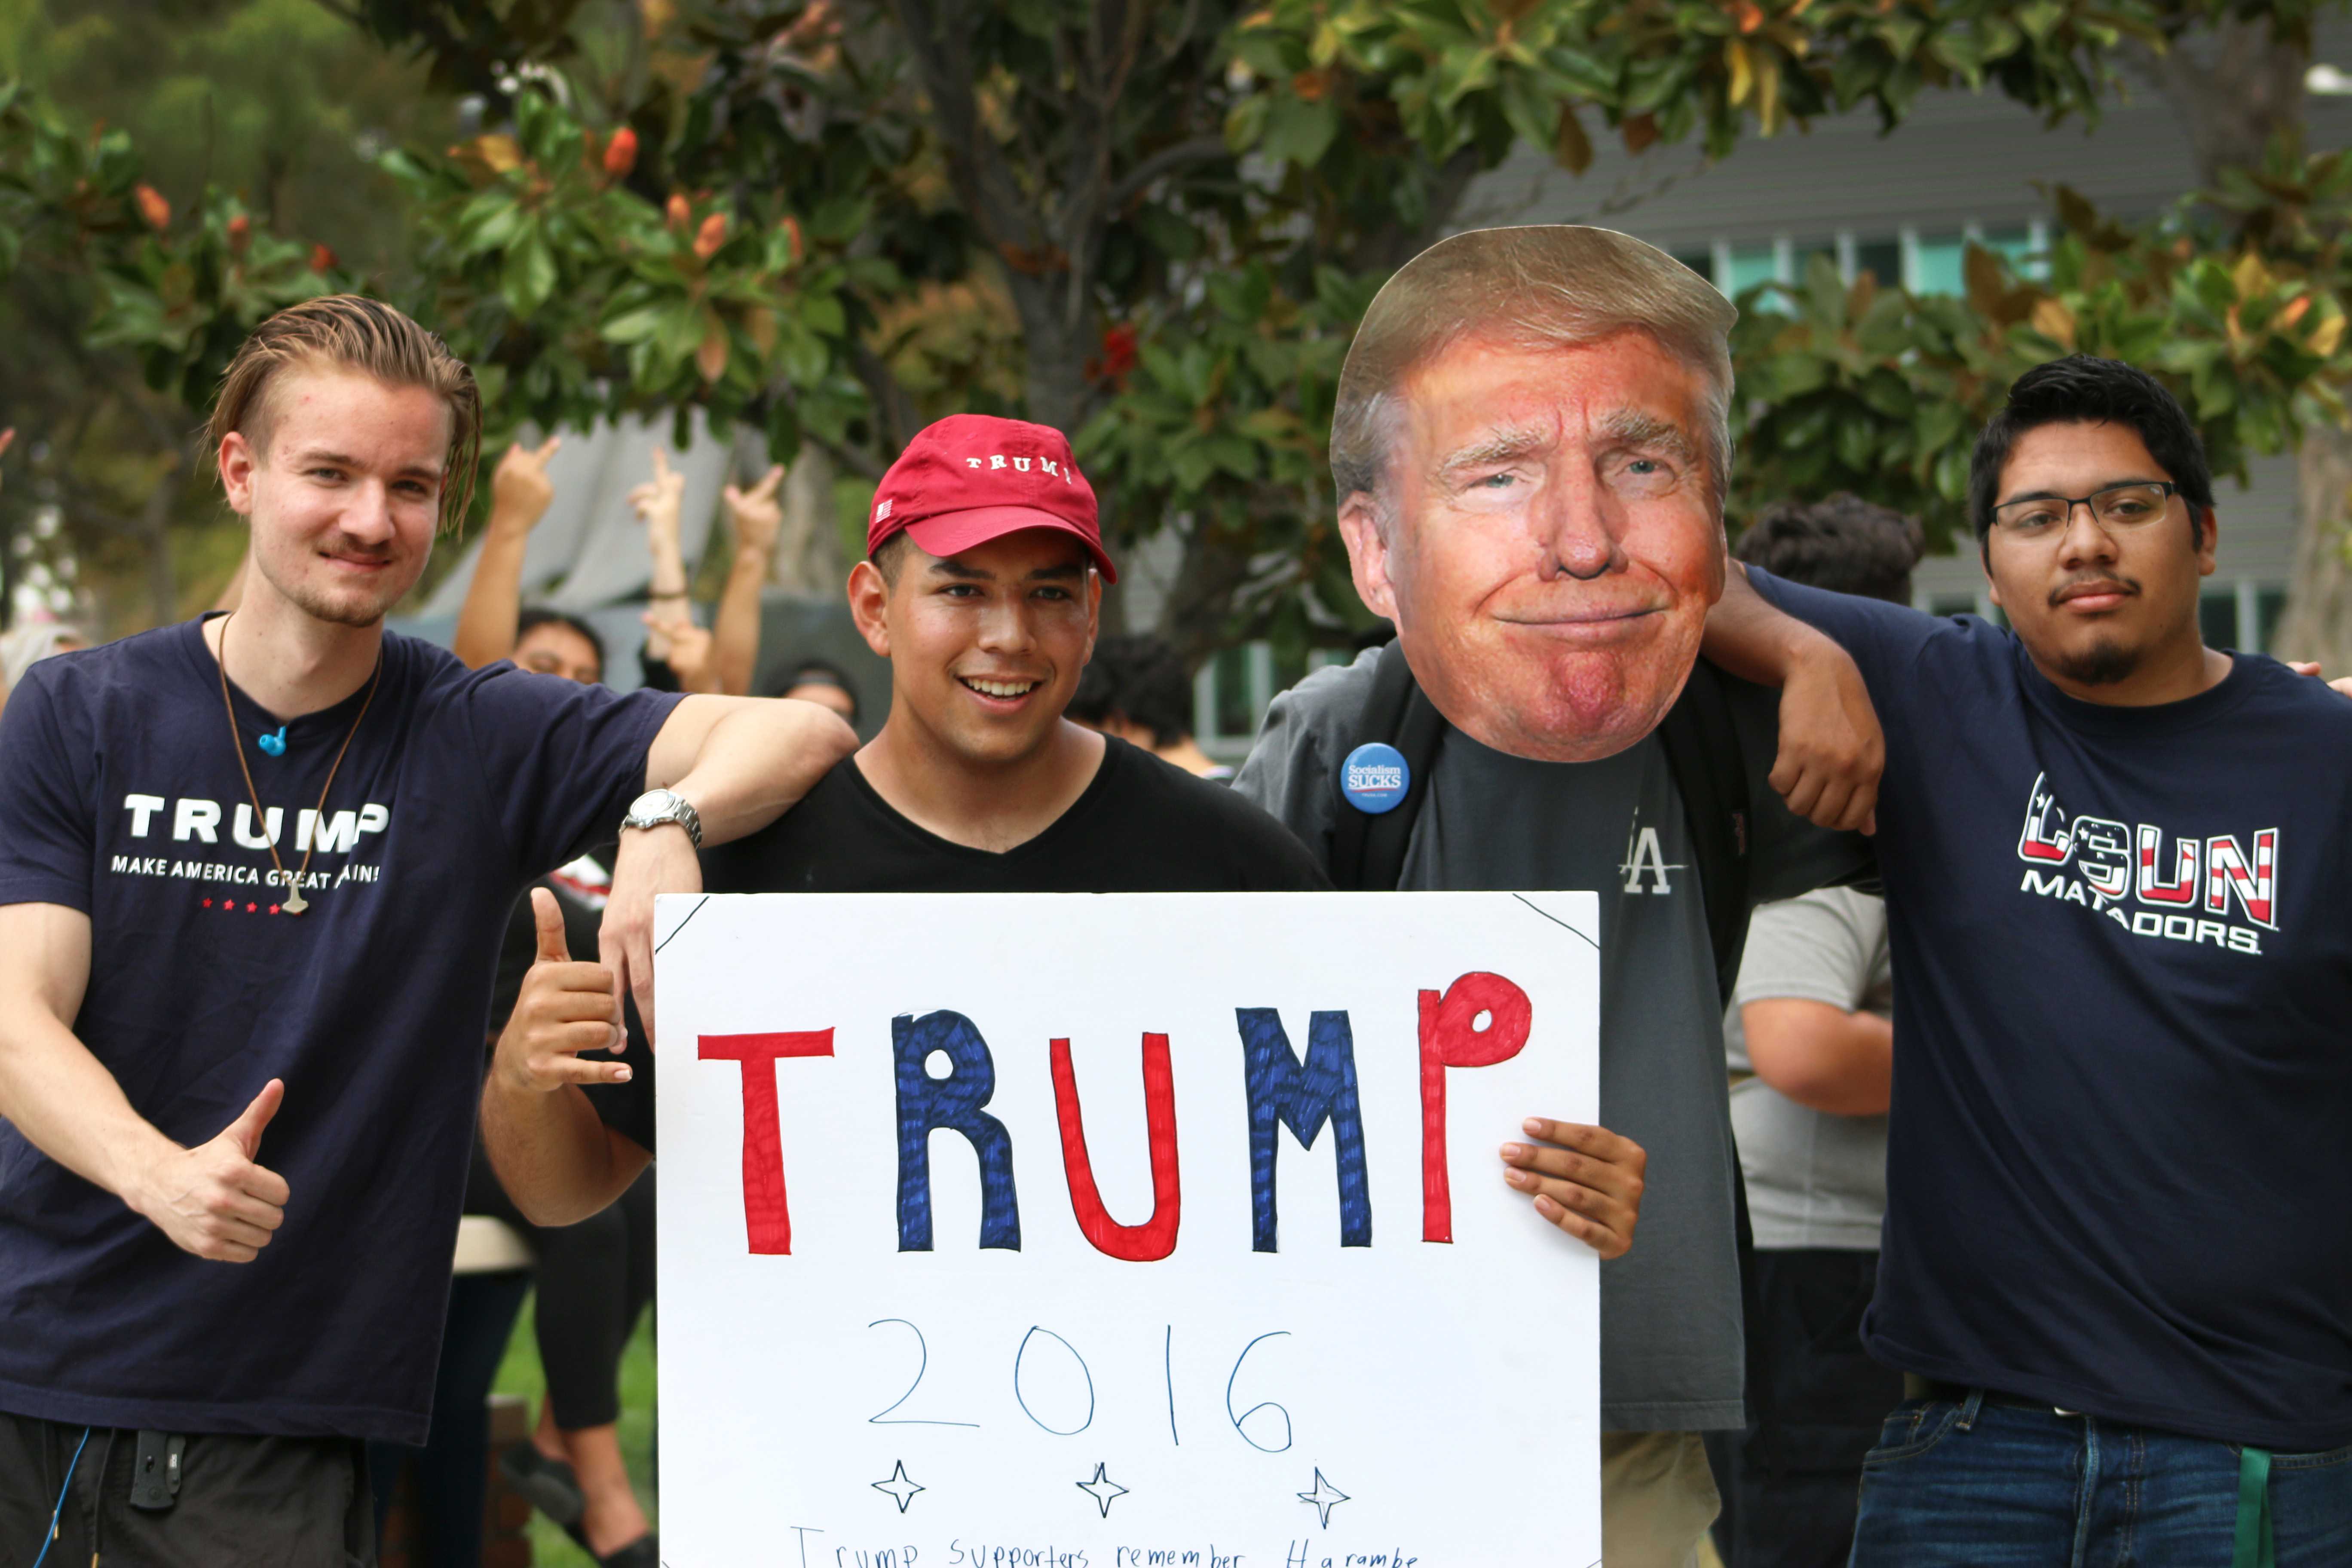 Alleged Trump supporters pose for a photo while campaigning on campus on Matador Walk near the Matador statue. Anti-Trump supporters show derogatory hand signals in the background. Photo credit: Nicole Wong